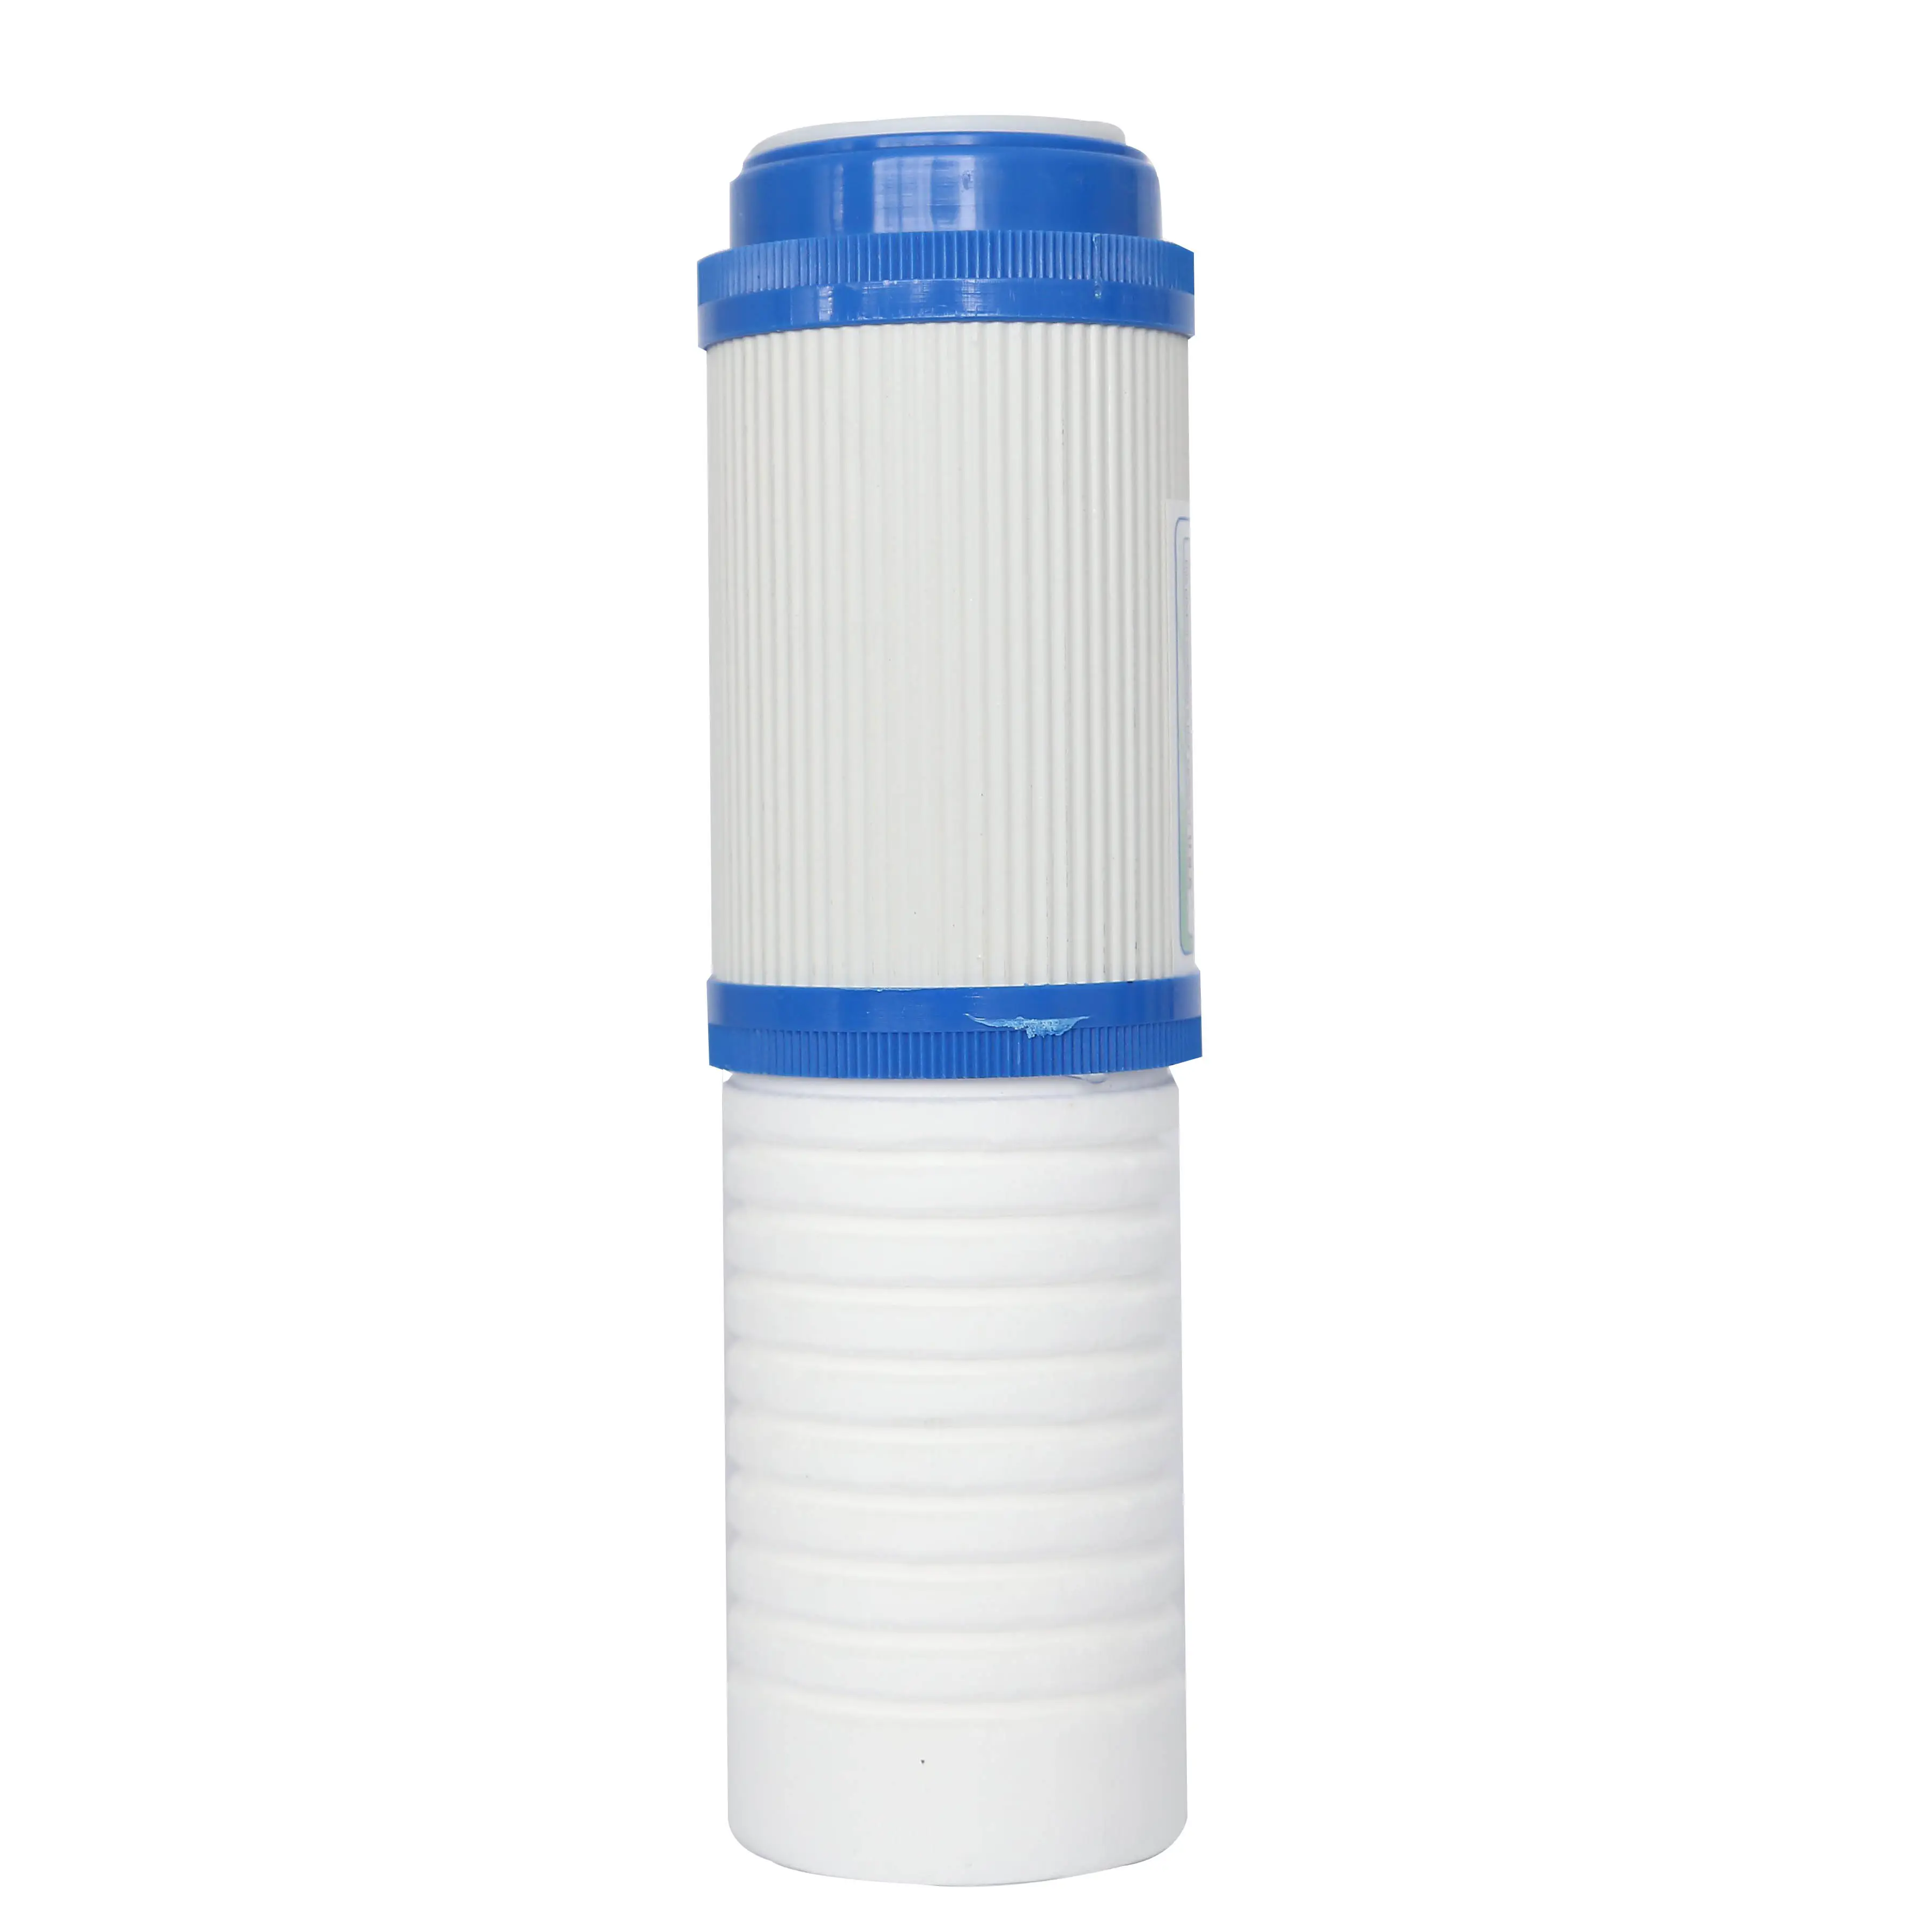 Water purifier filter cartridge can be used coconut shell activated carbon PP filter cartridge compound filter cartridge